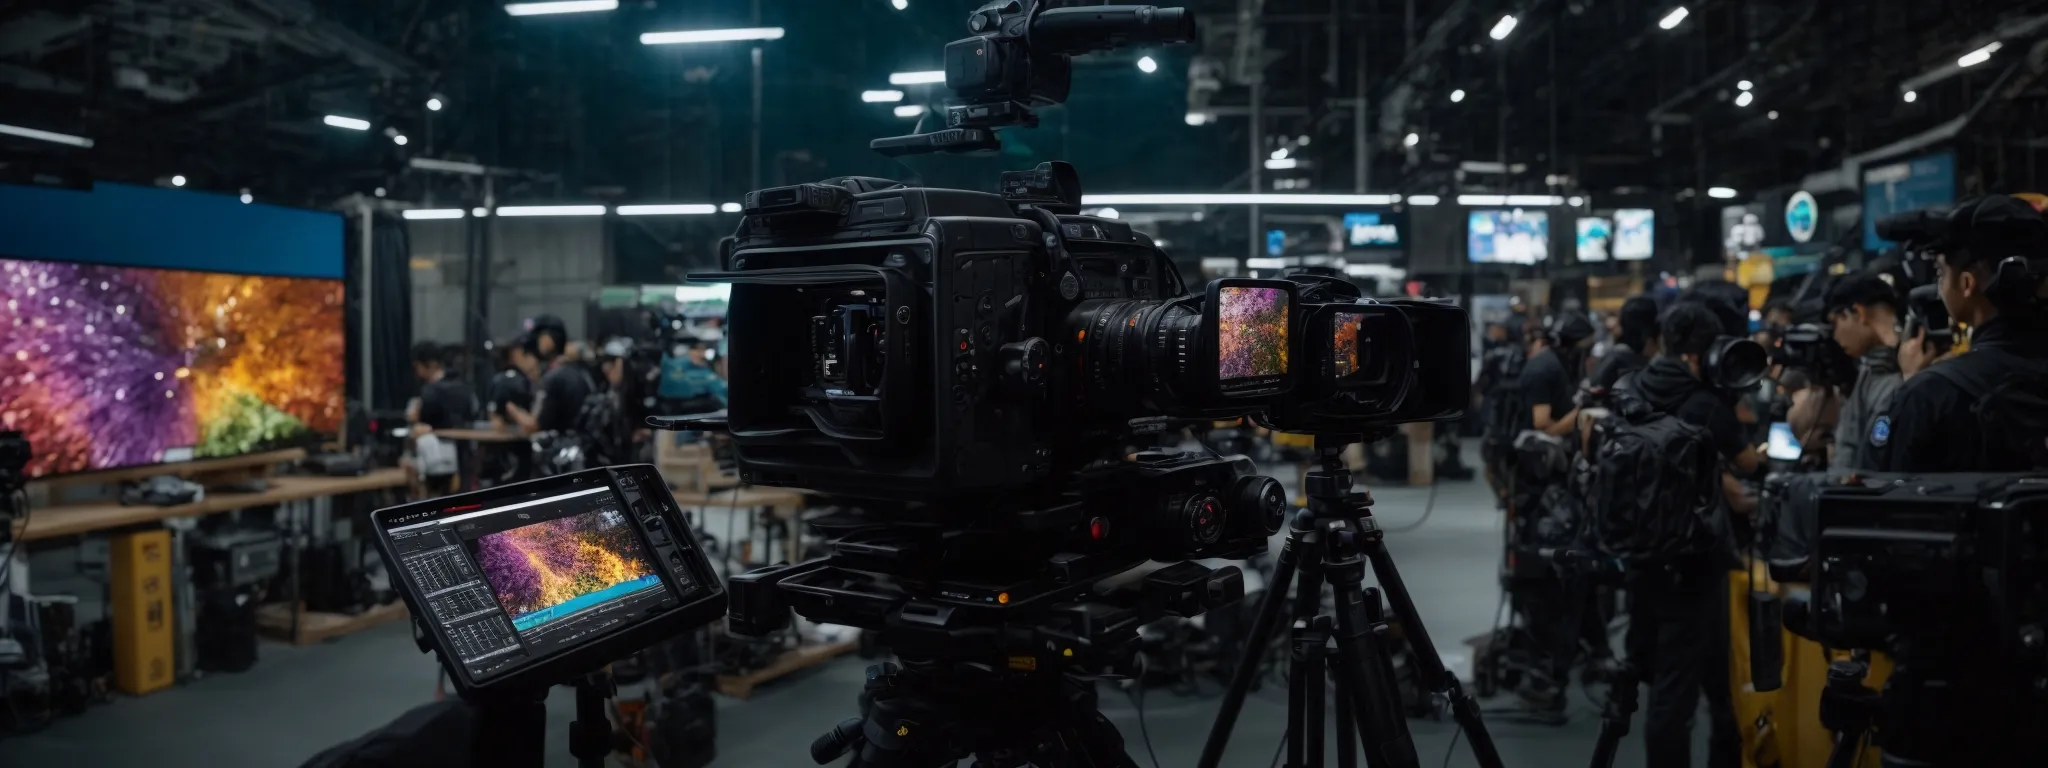 a camera on a tripod overlooks a bustling production set with screens displaying colorful graphics and engaging visuals.